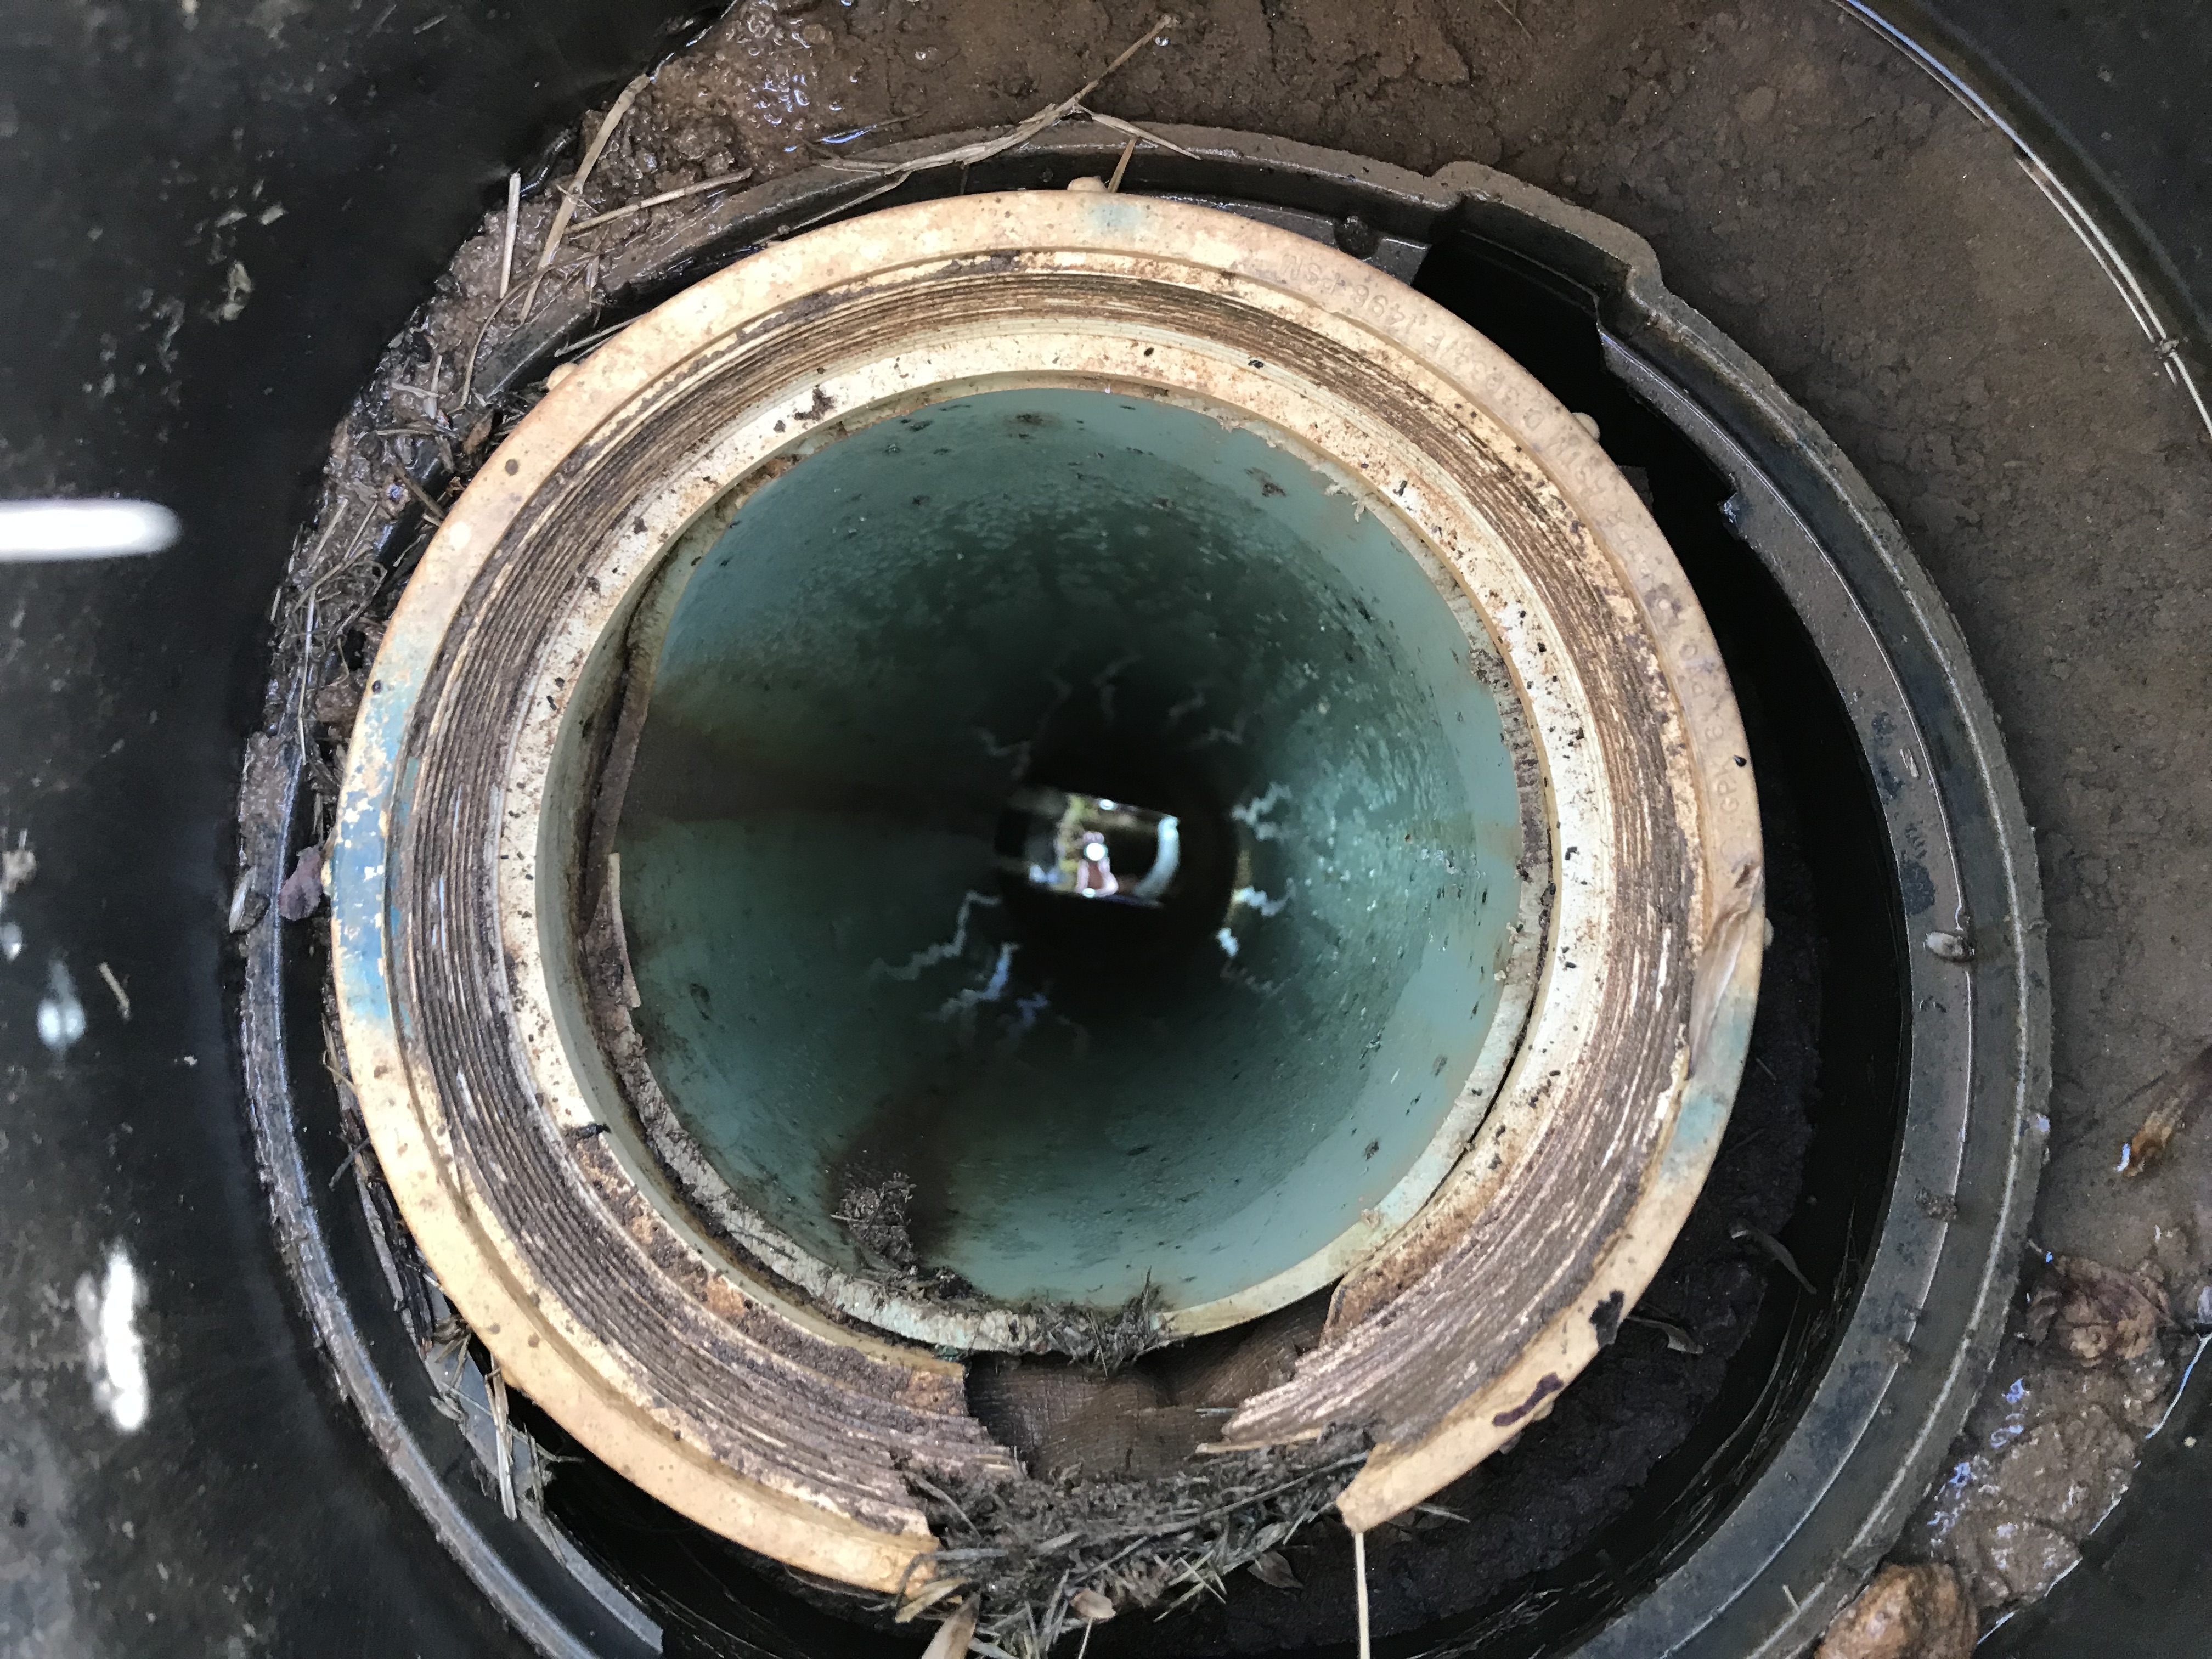 Sewer Clean Out Plugs